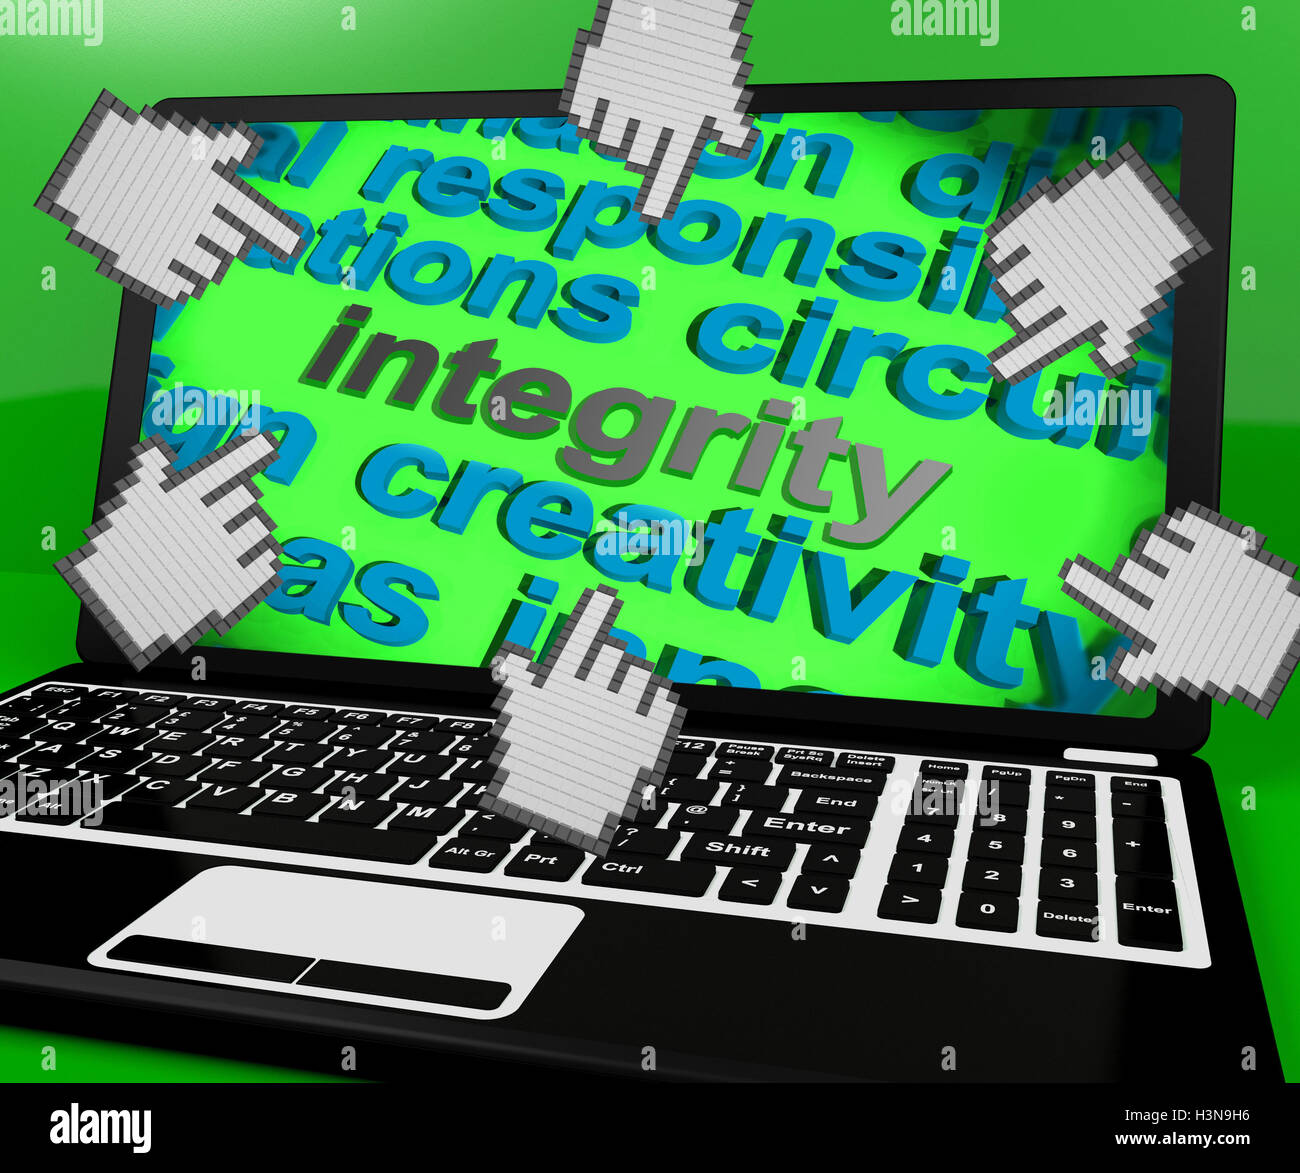 Integrity Laptop Screen Shows Morality Virtue And Decency Stock Photo